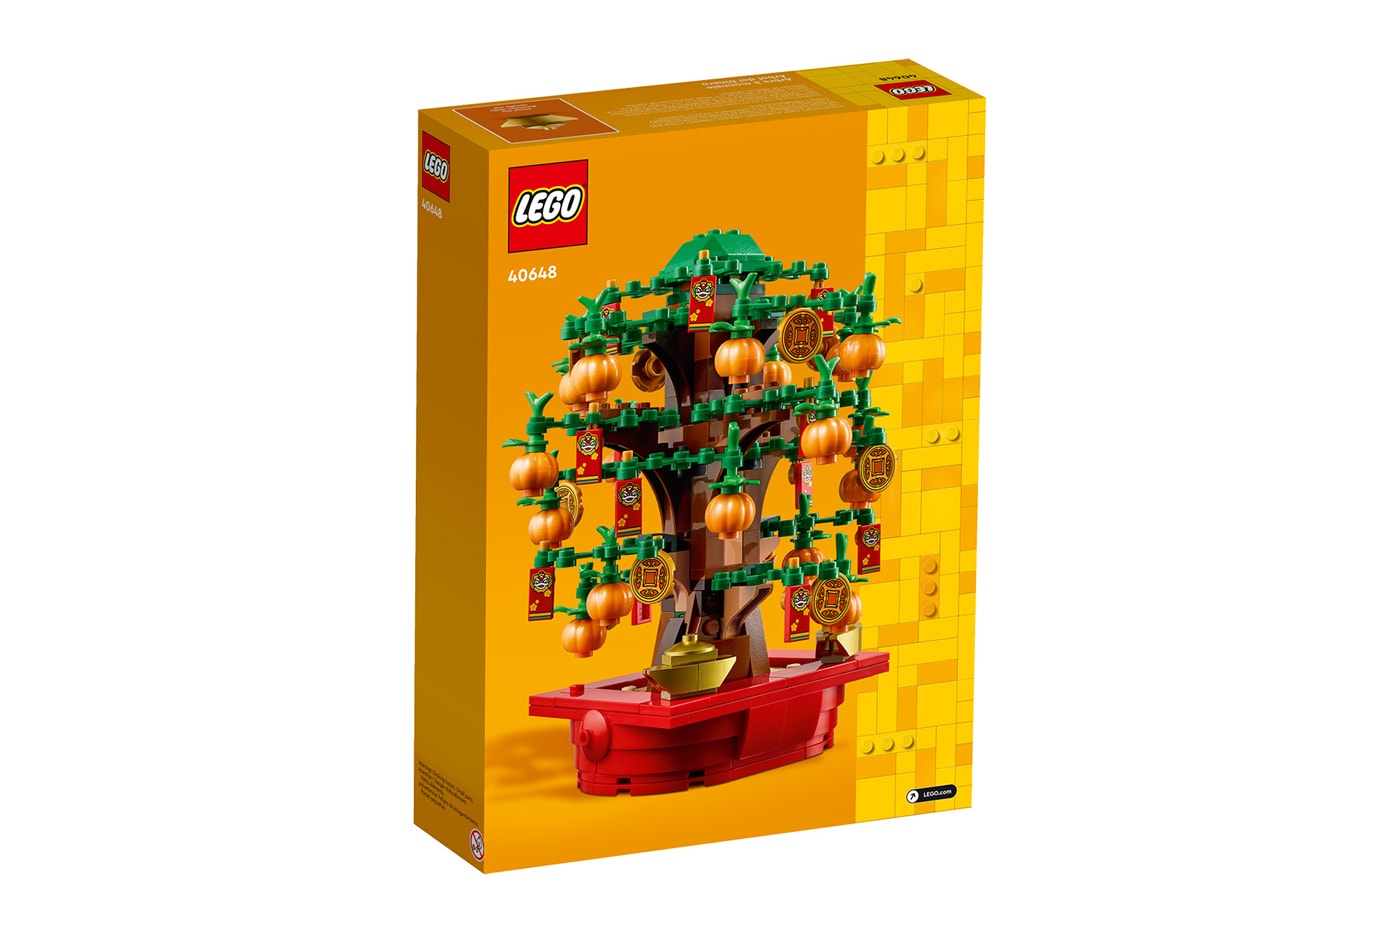 LEGO Money Tree model tangerine gold coin plant red pot lunar new year 40648 release info date price